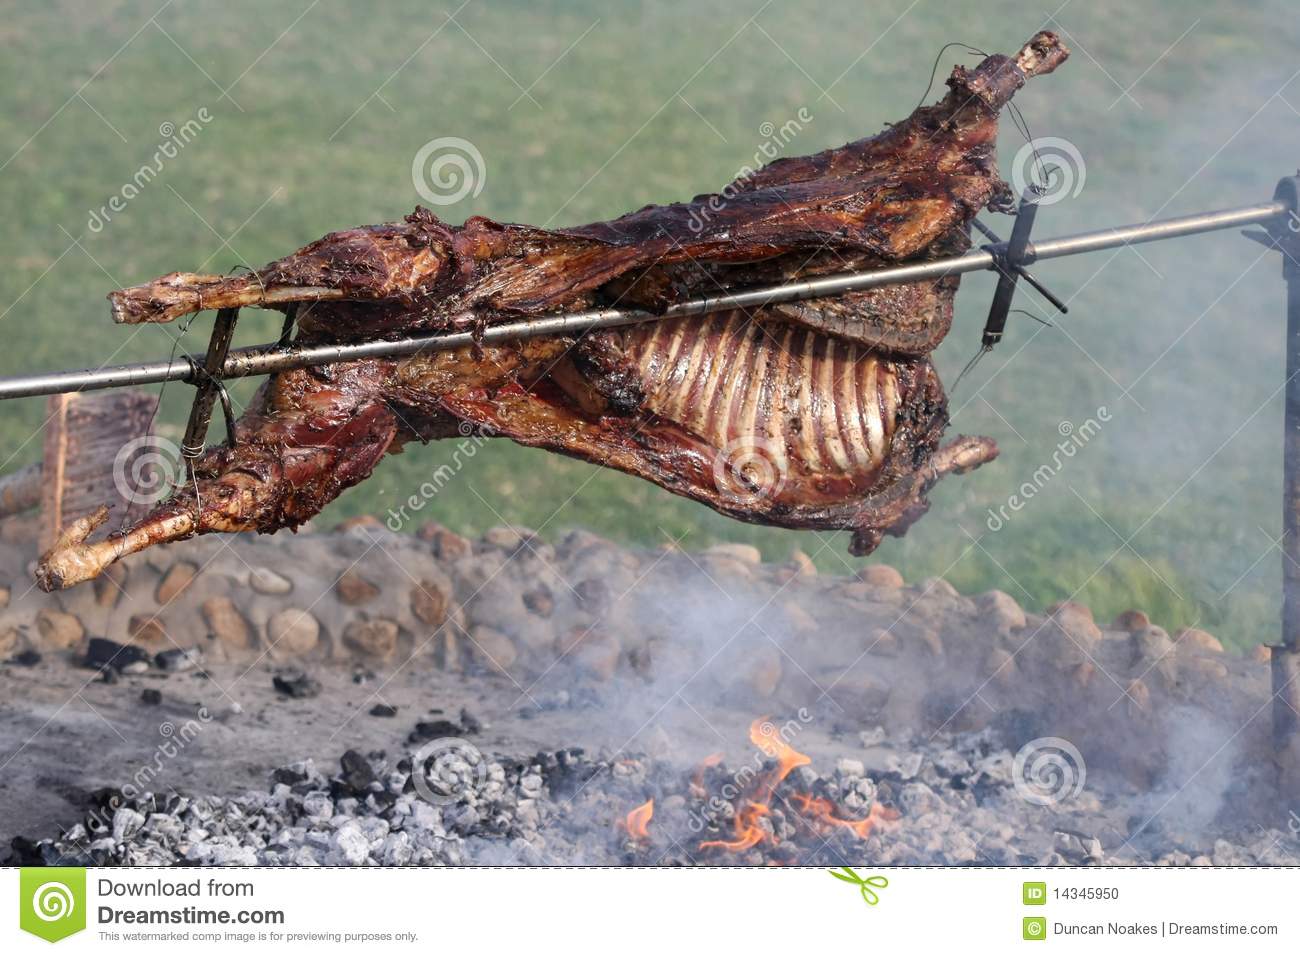 Delicious Roast Lamb On A Spit Over An Open Fire